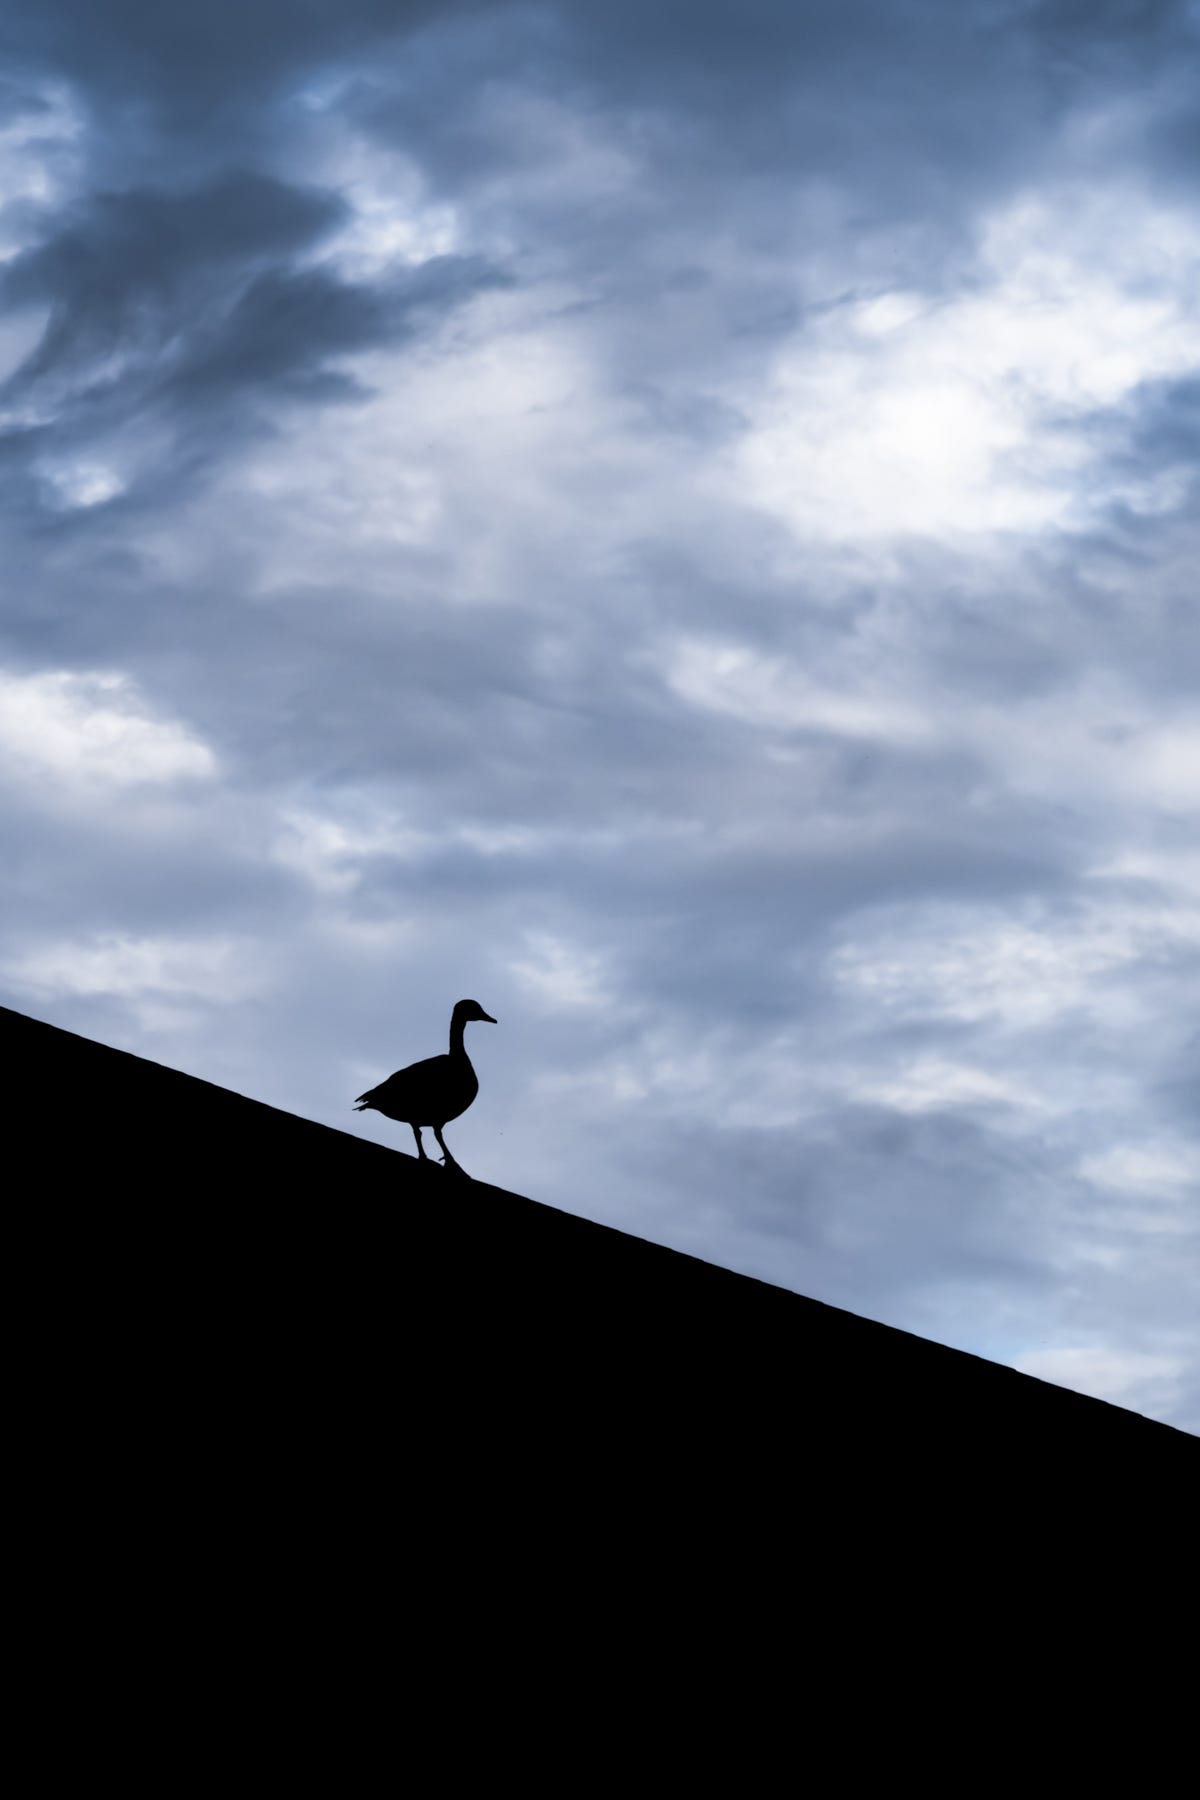 A single goose in silhouette stands on the descending slope of roof under cloudy skies at blue hour. 